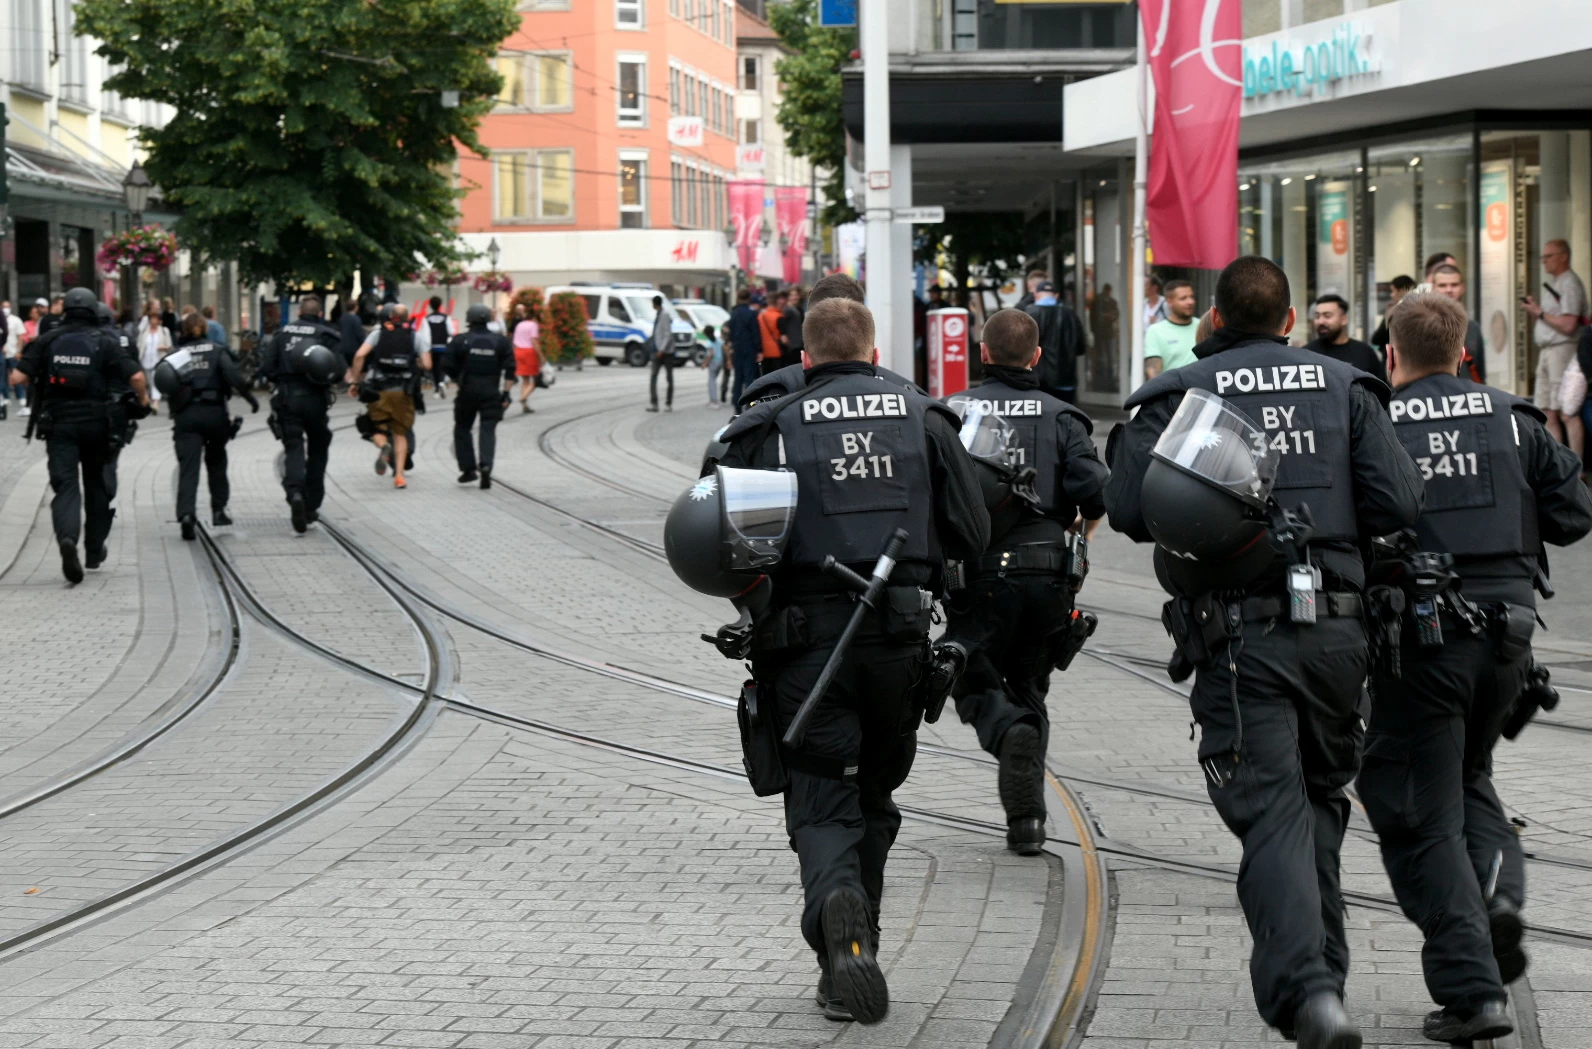 Germany stabbings: Police say knife attack victims were all women